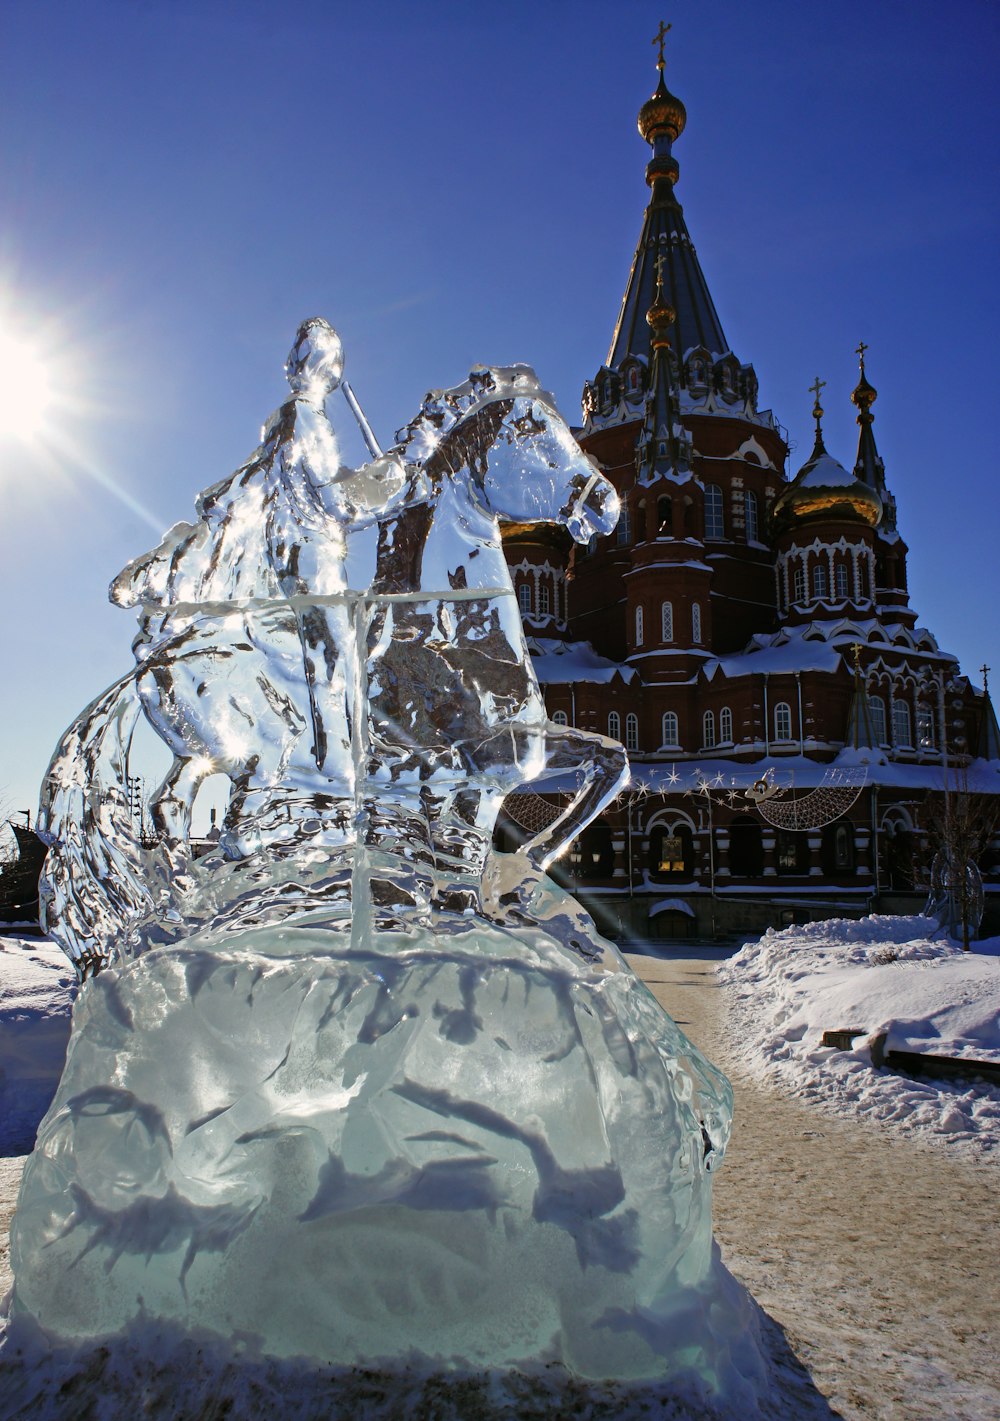 an ice sculpture of a horse and rider in front of a building